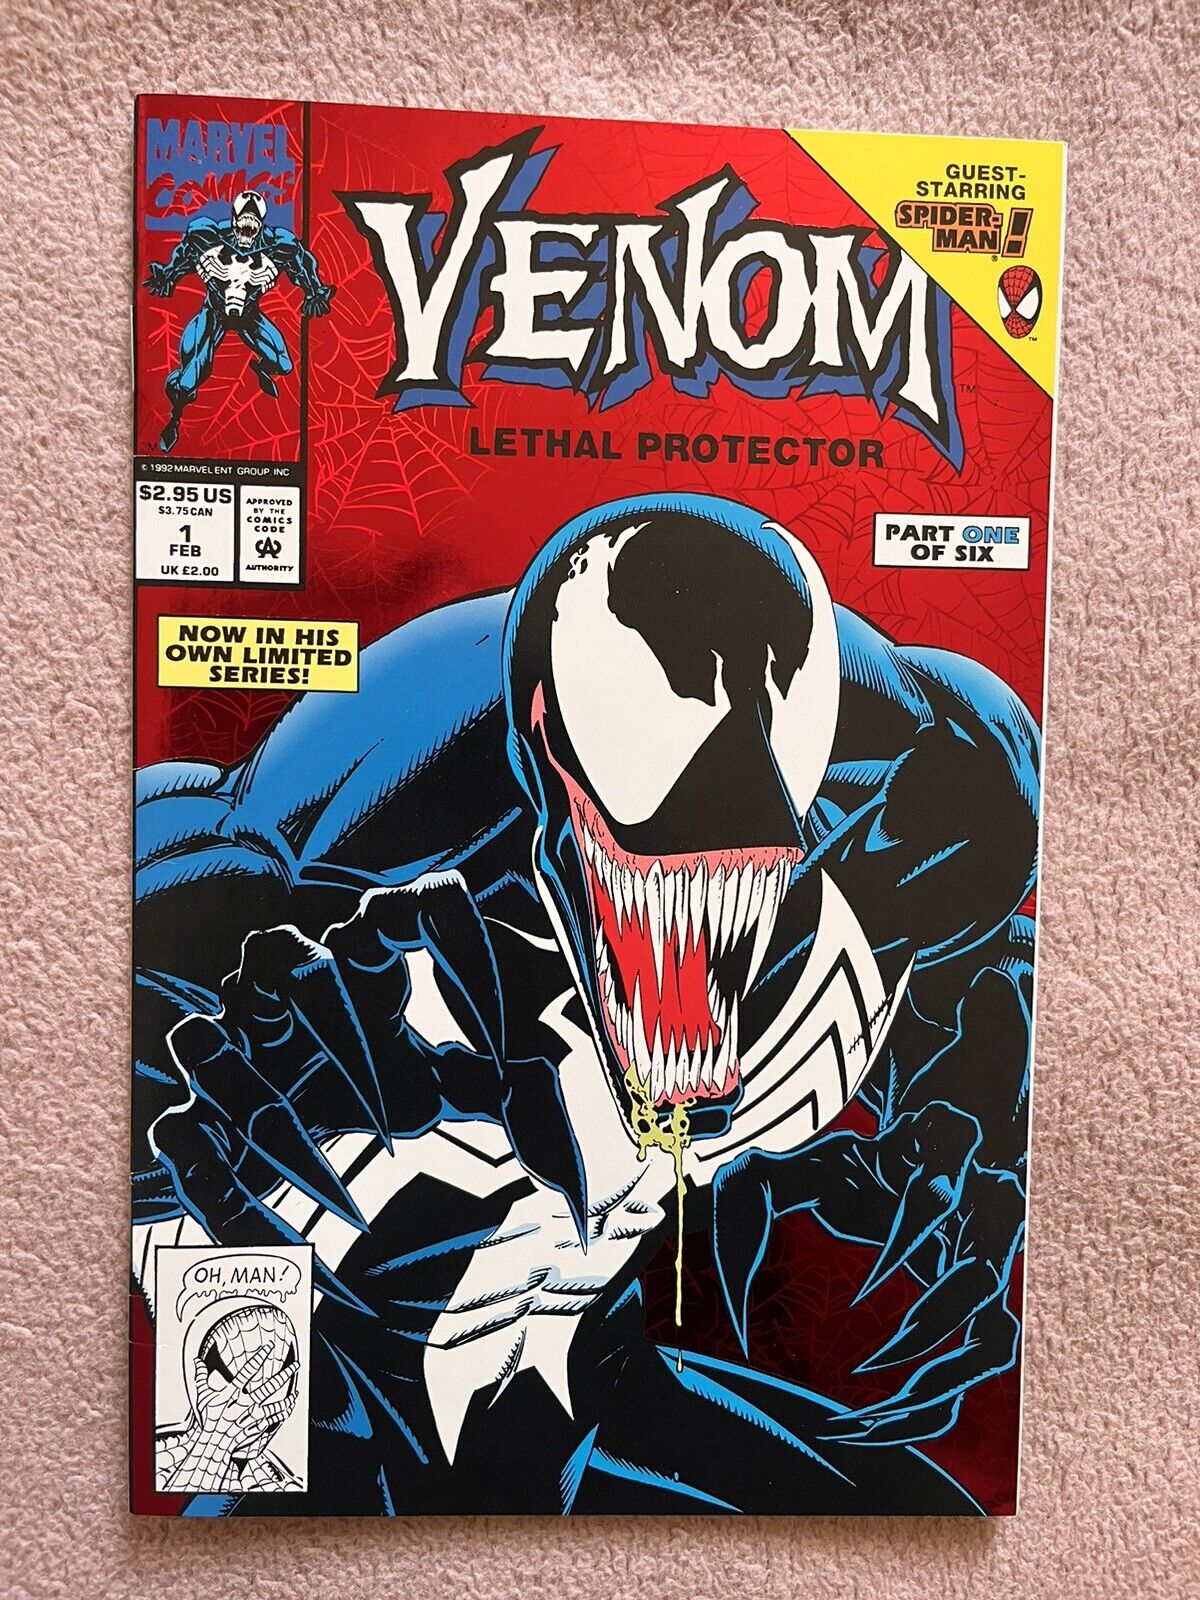 Venom Lethal Protector # 1 Marvel Comics 1993 Solo Title Red Foil CGC Candidate